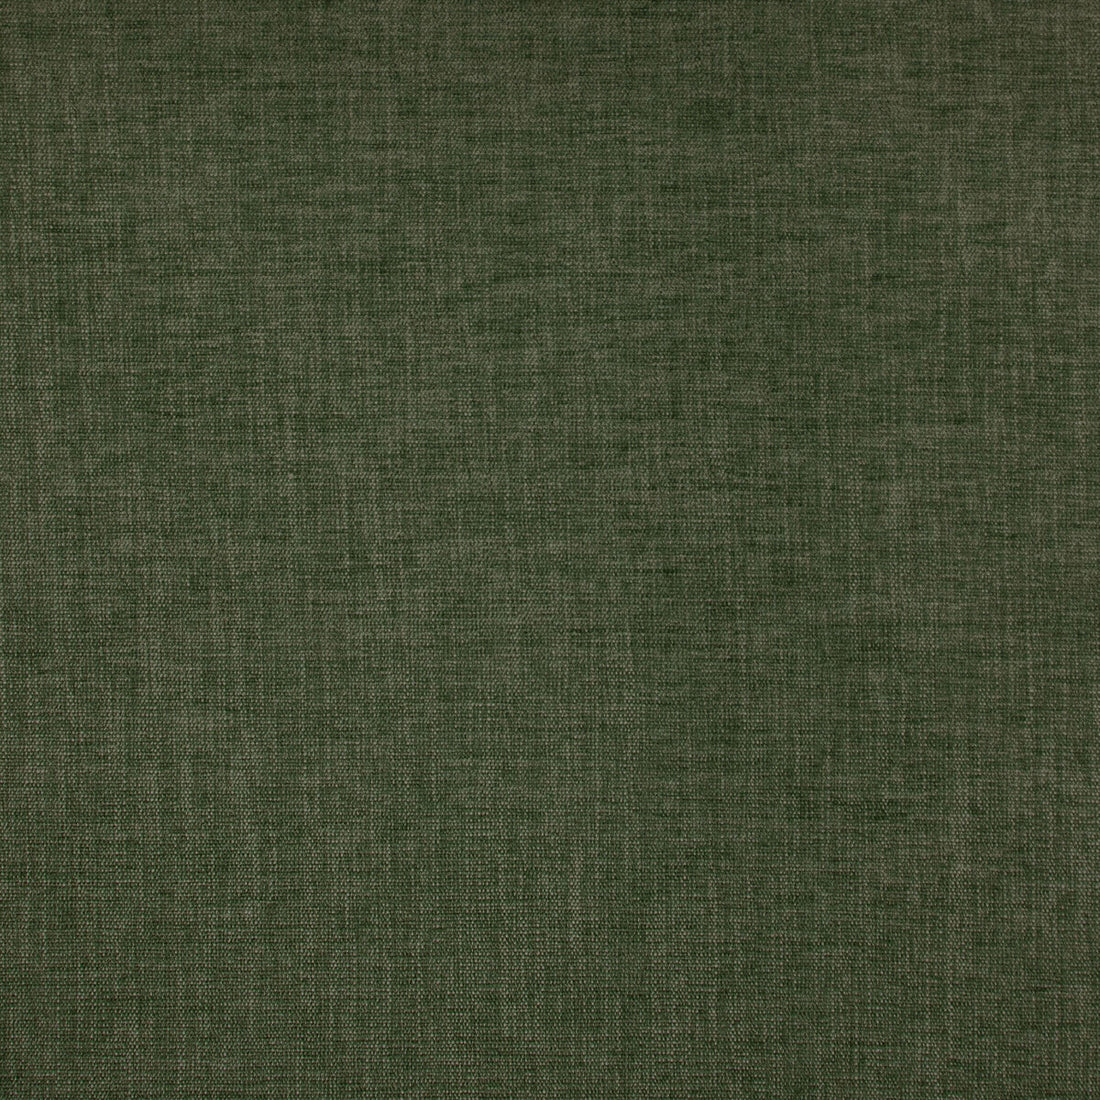 Moro fabric in verde color - pattern GDT5670.009.0 - by Gaston y Daniela in the Gaston Maiorica collection